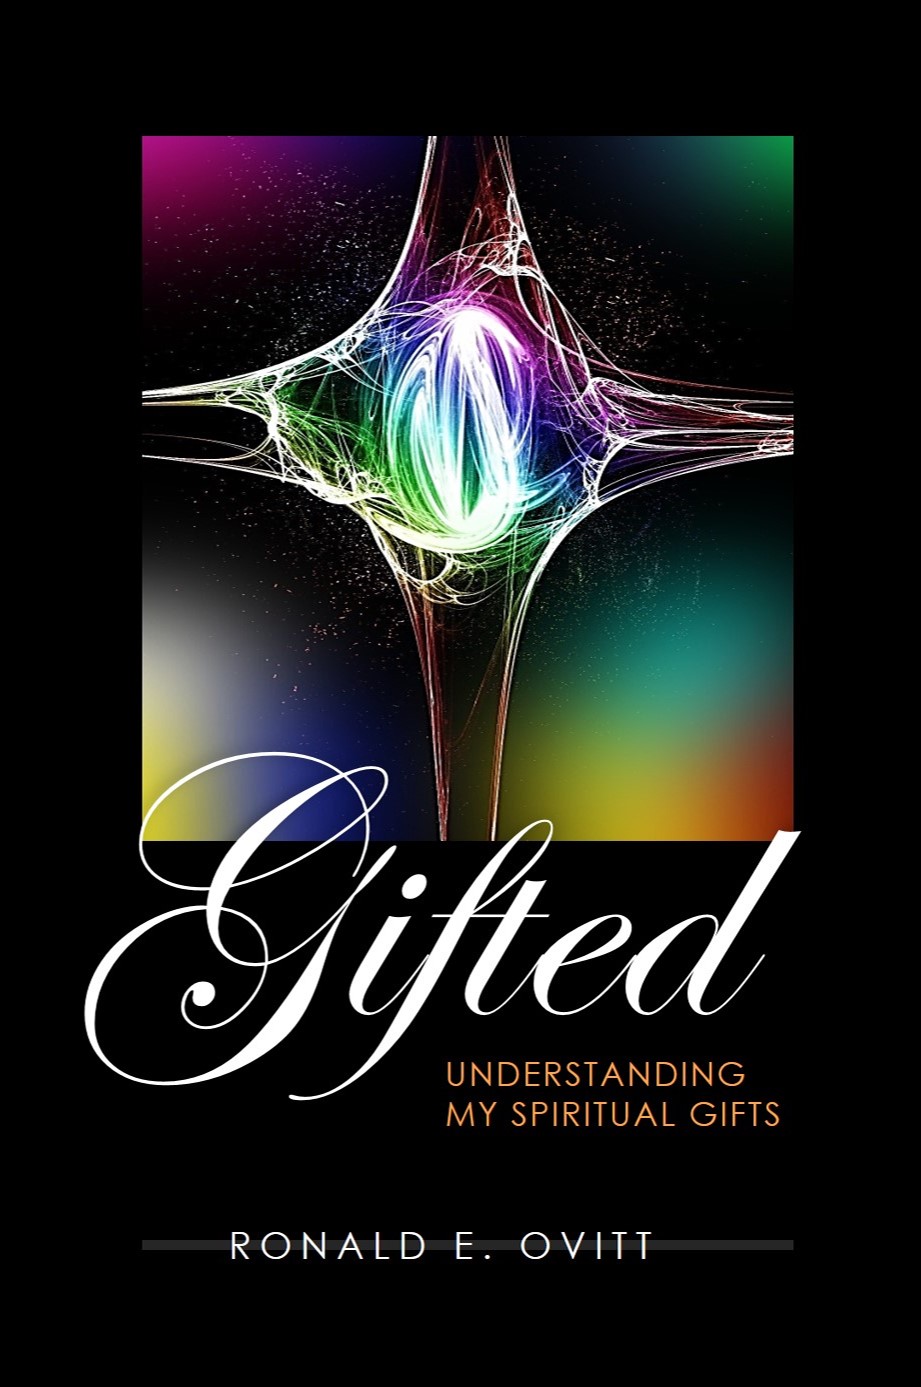 Cover of the book "Gifted: Understanding my Spiritual Gifts"